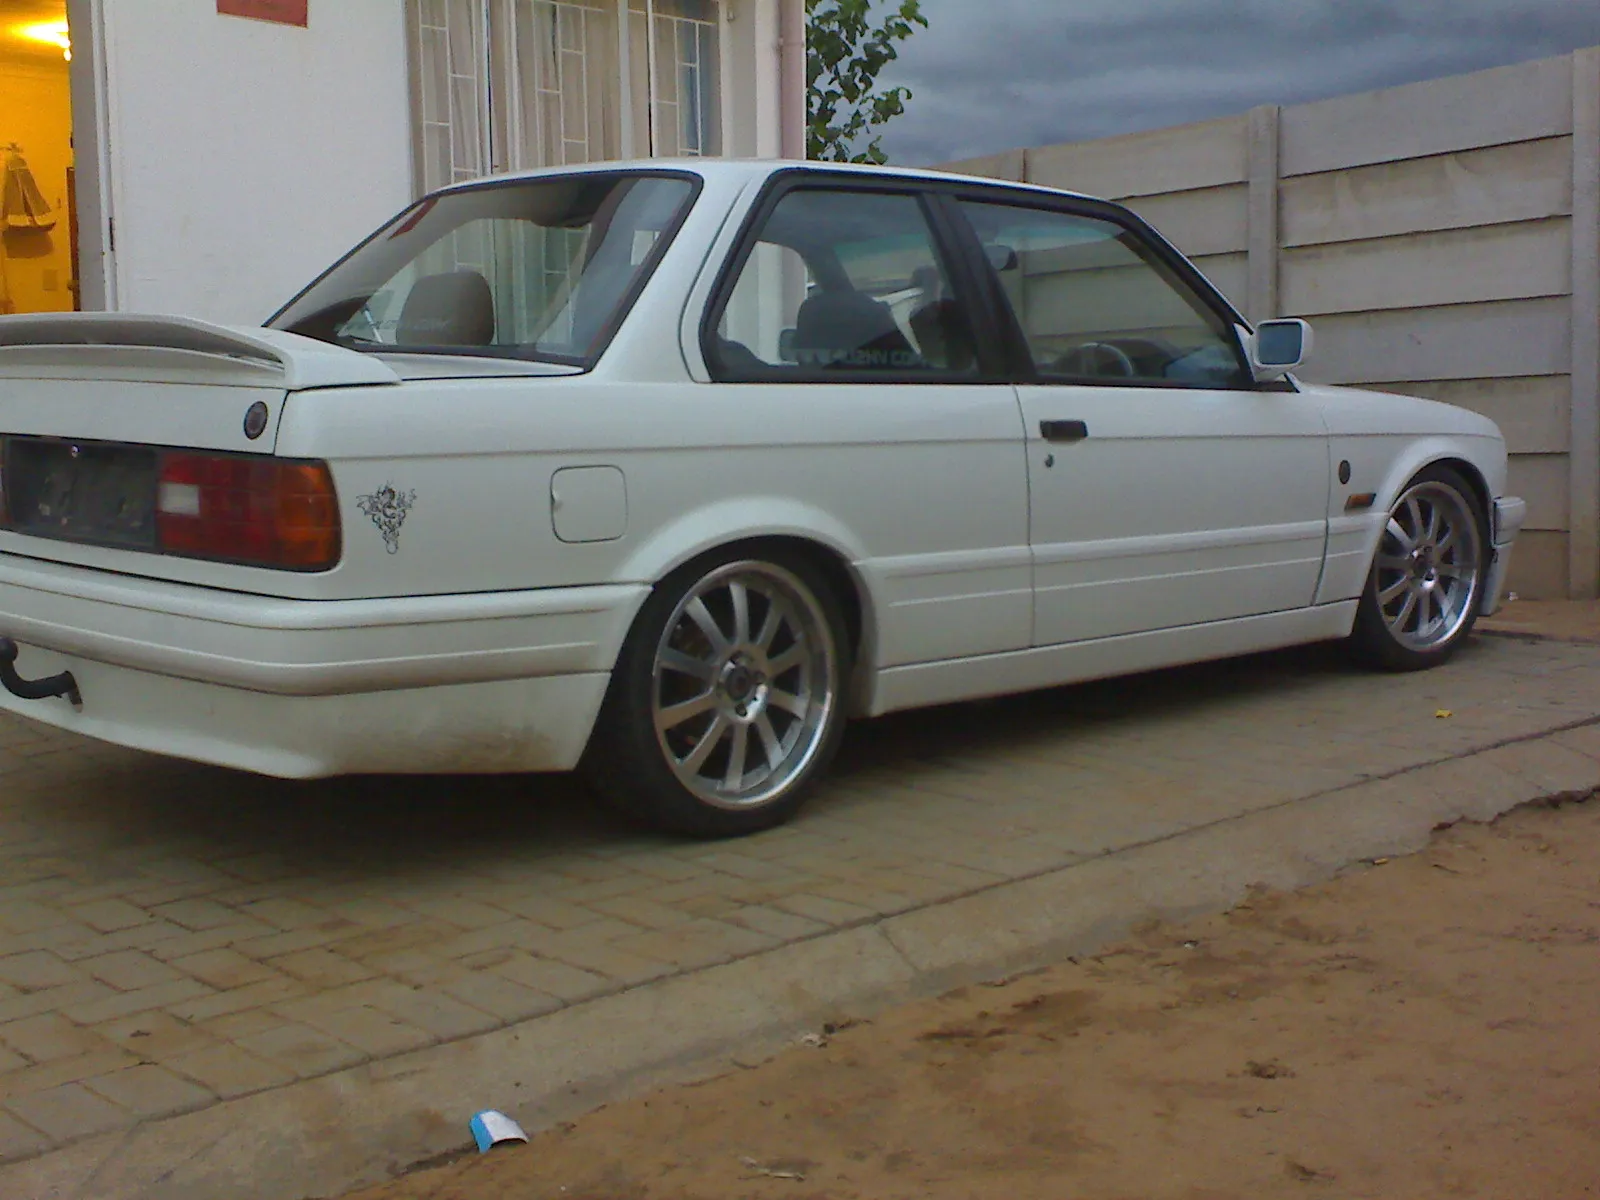 BMW 3 series 325is 1991 photo - 7